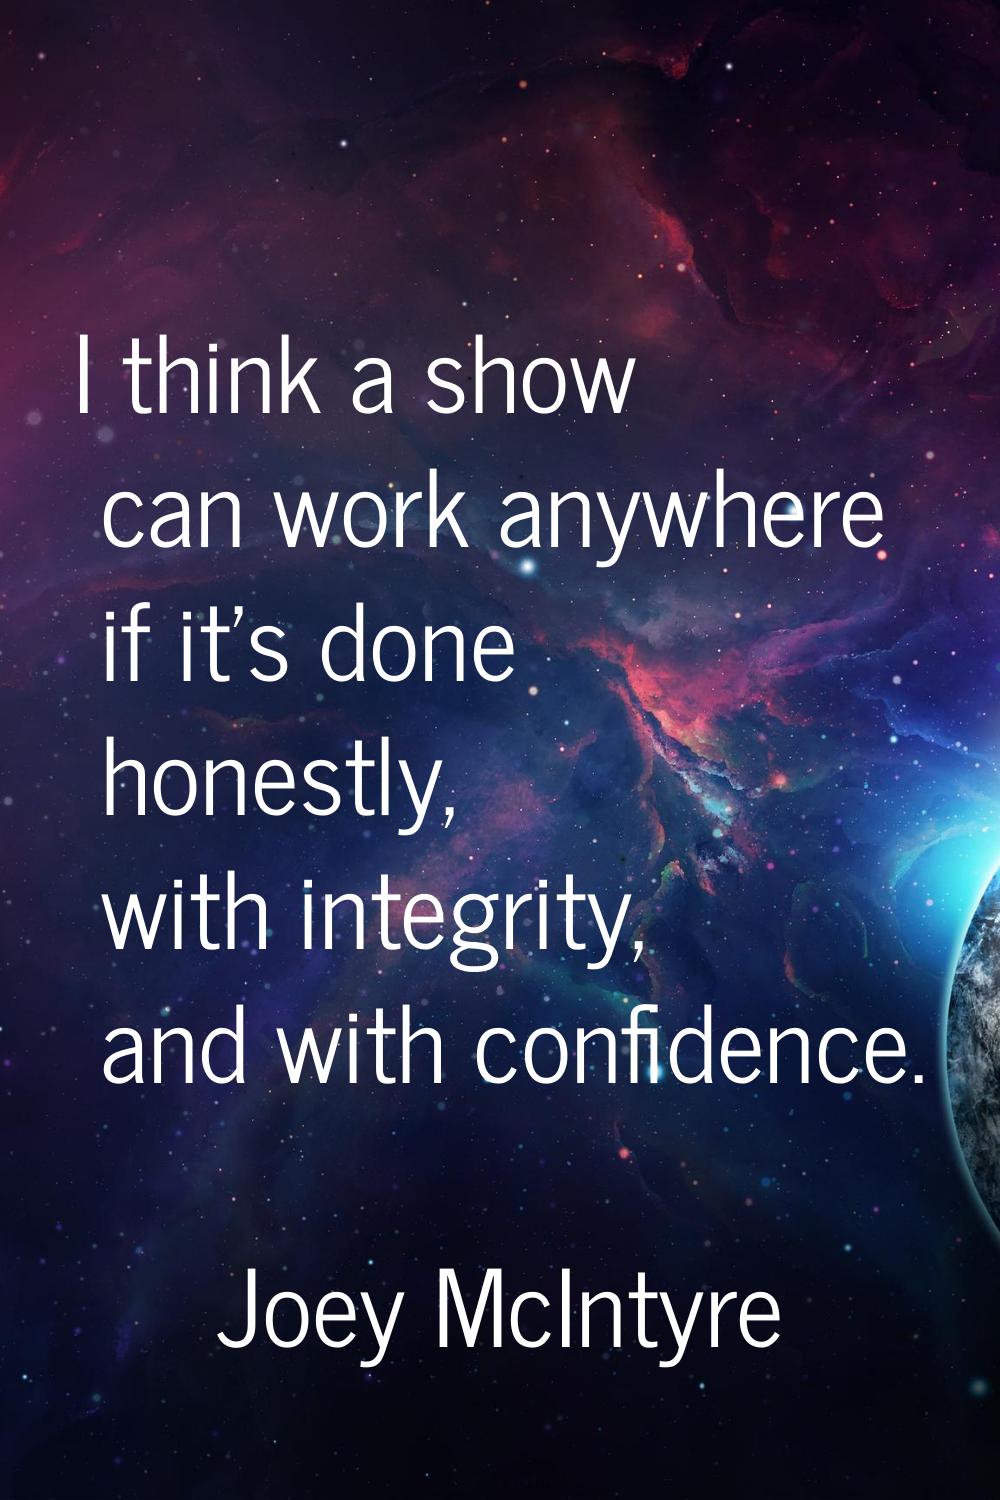 I think a show can work anywhere if it's done honestly, with integrity, and with confidence.